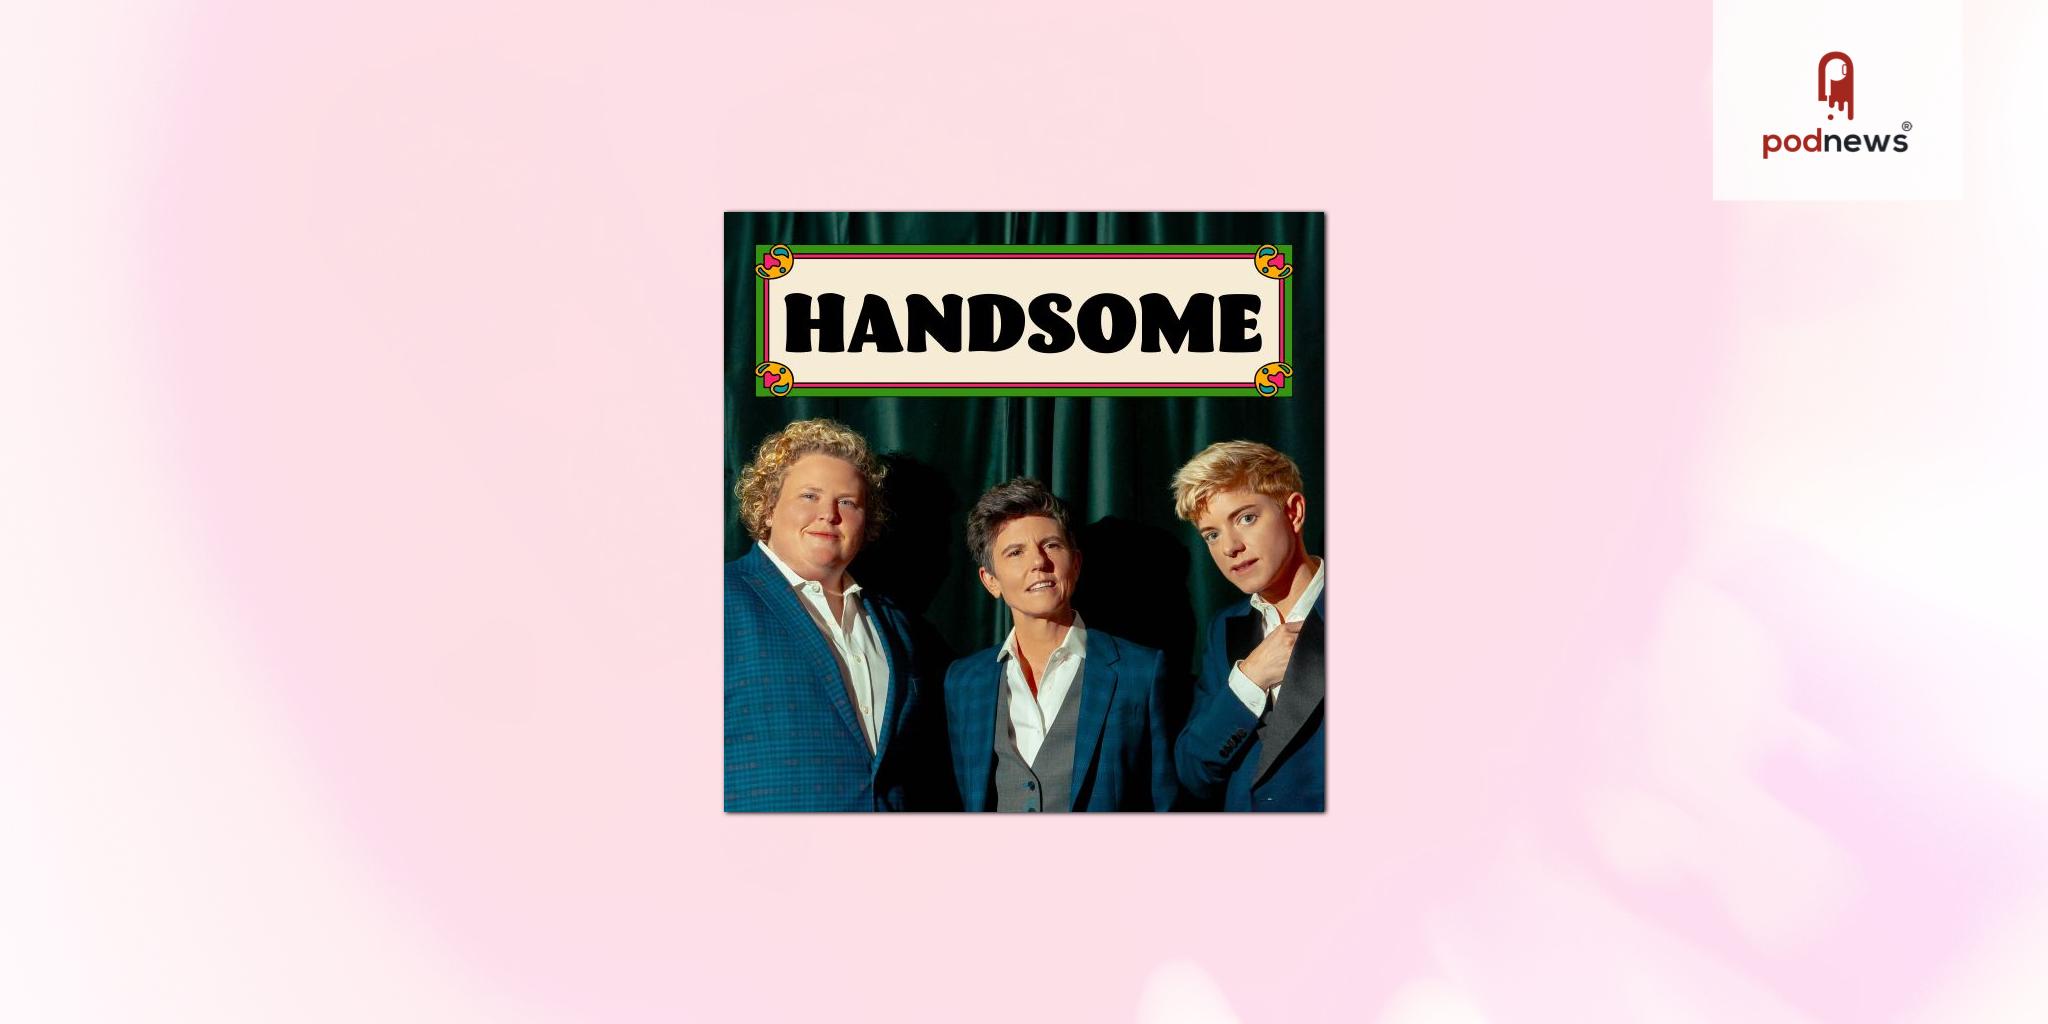 Tig Notaro, Fortune Feimster, and Mae Martin launch new comedy podcast, Handsome, with ad sales by Gumball